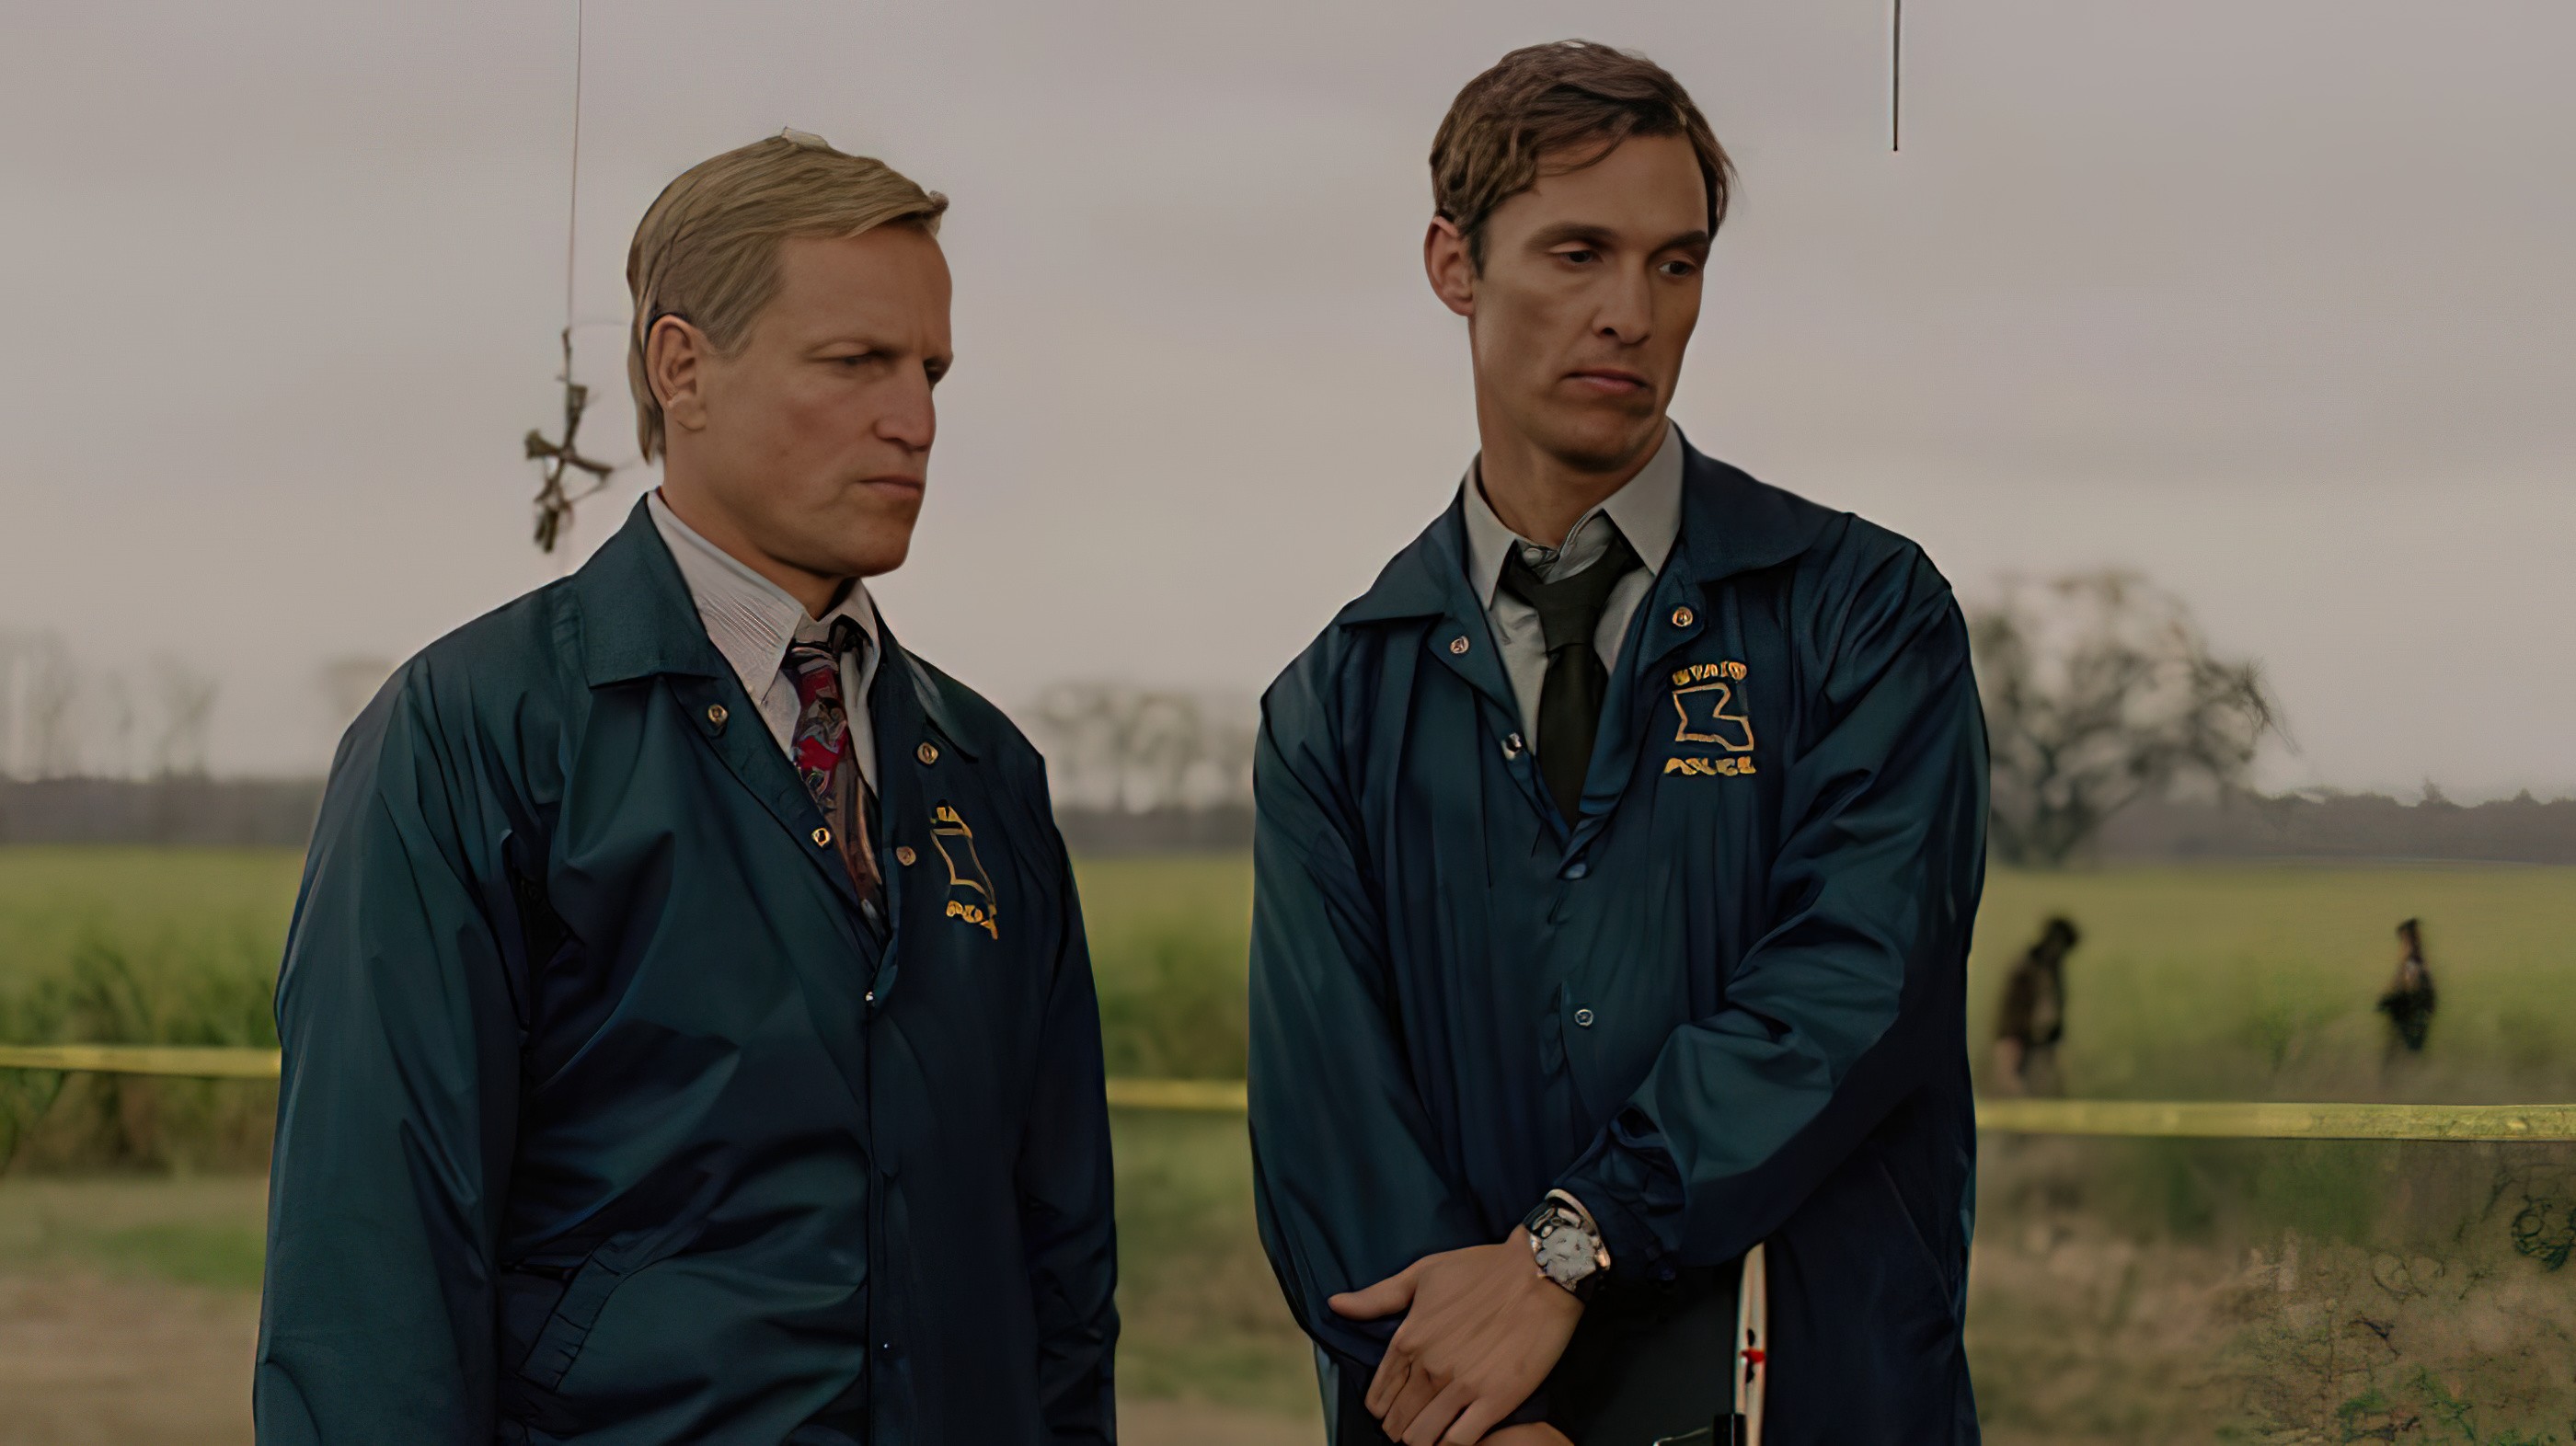 Rust cohle and marty фото 21